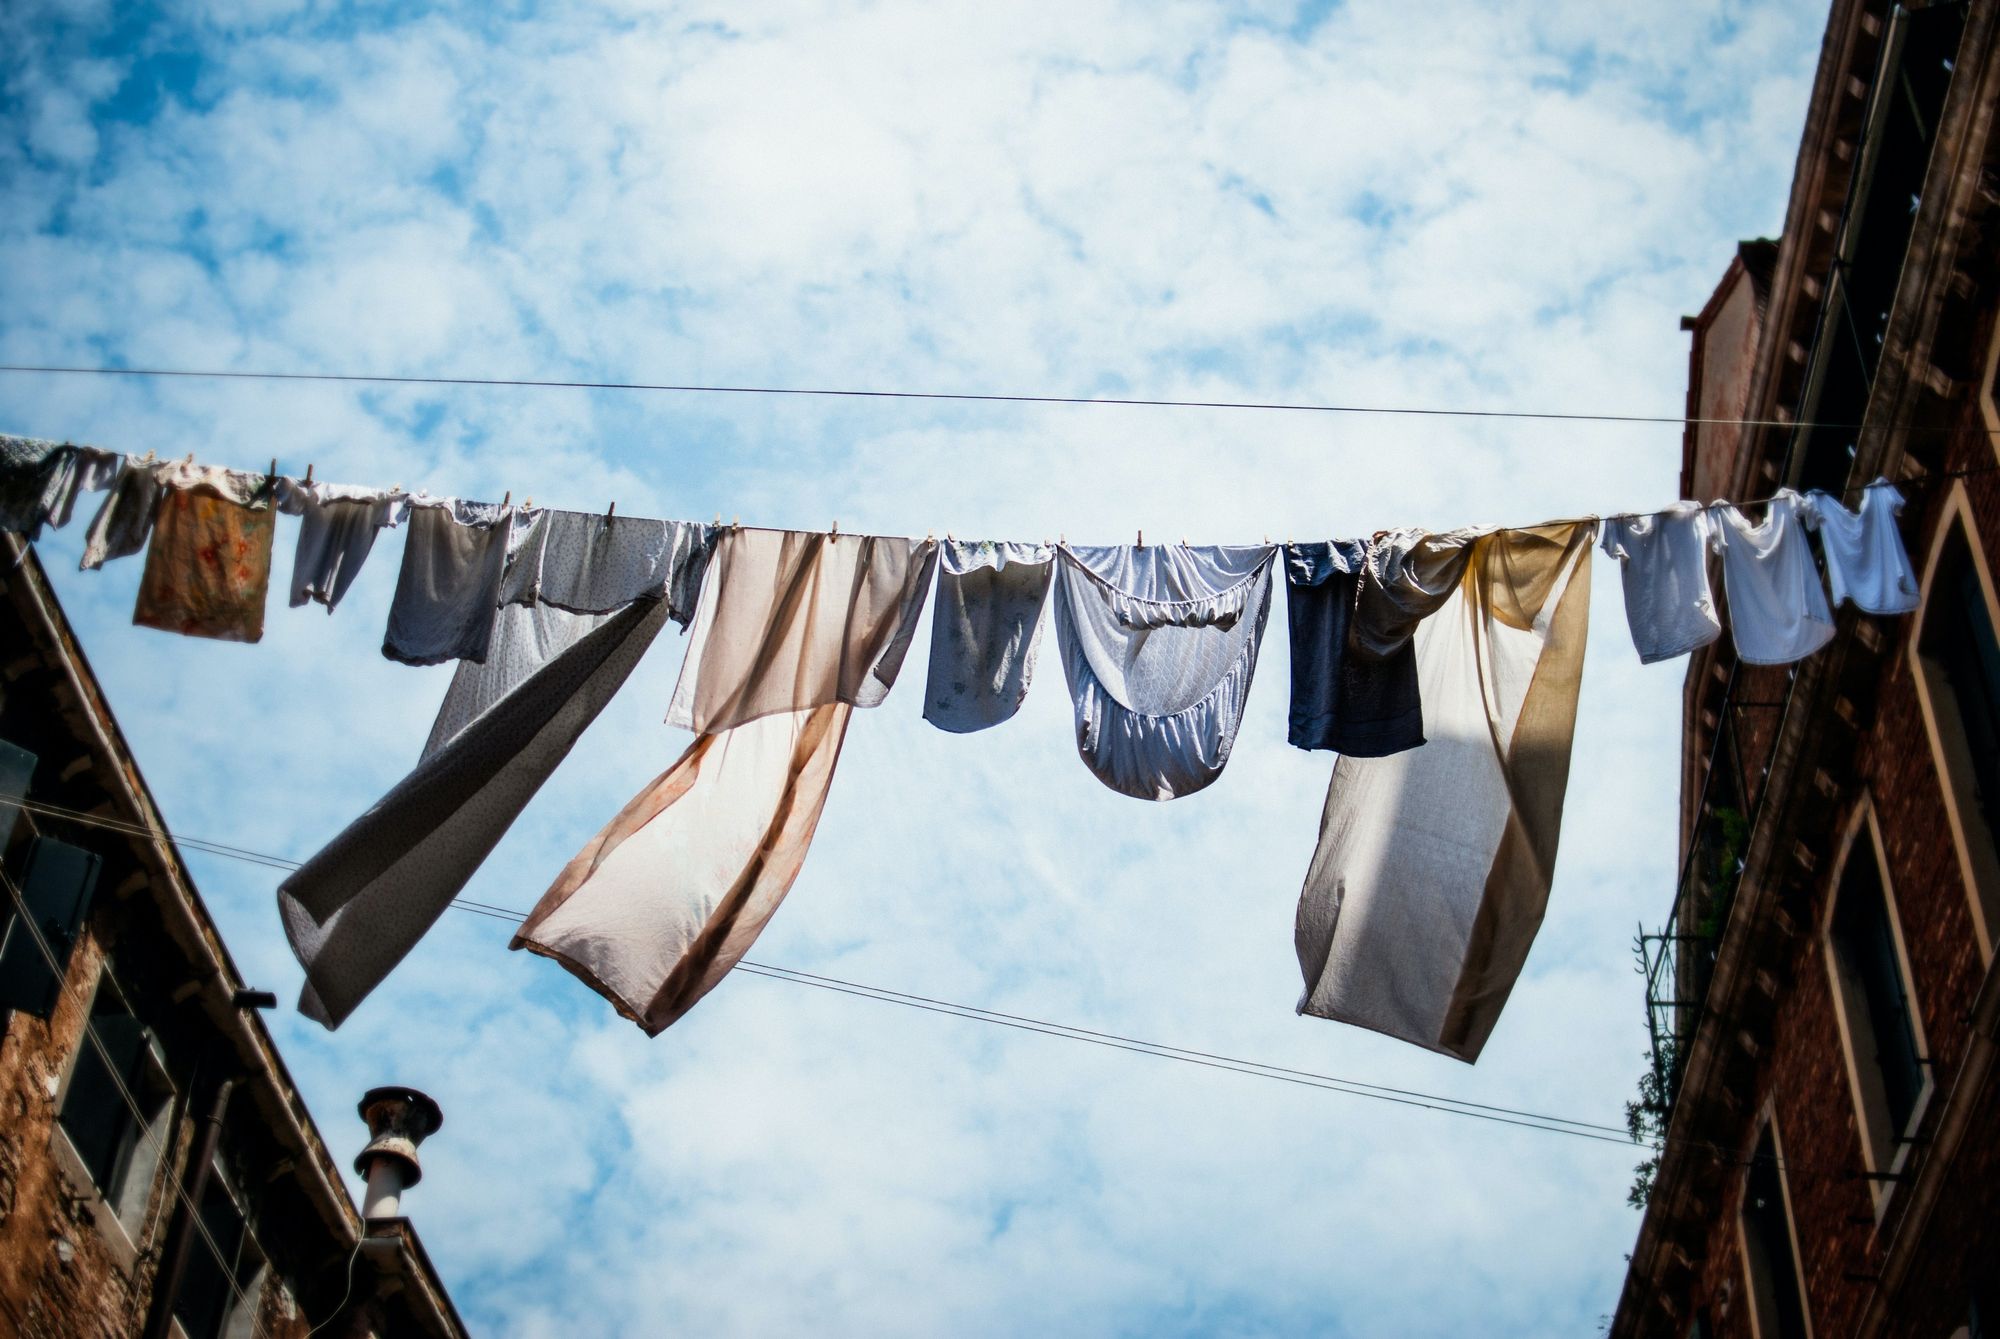 clothes in line being aired under the sun outdoors